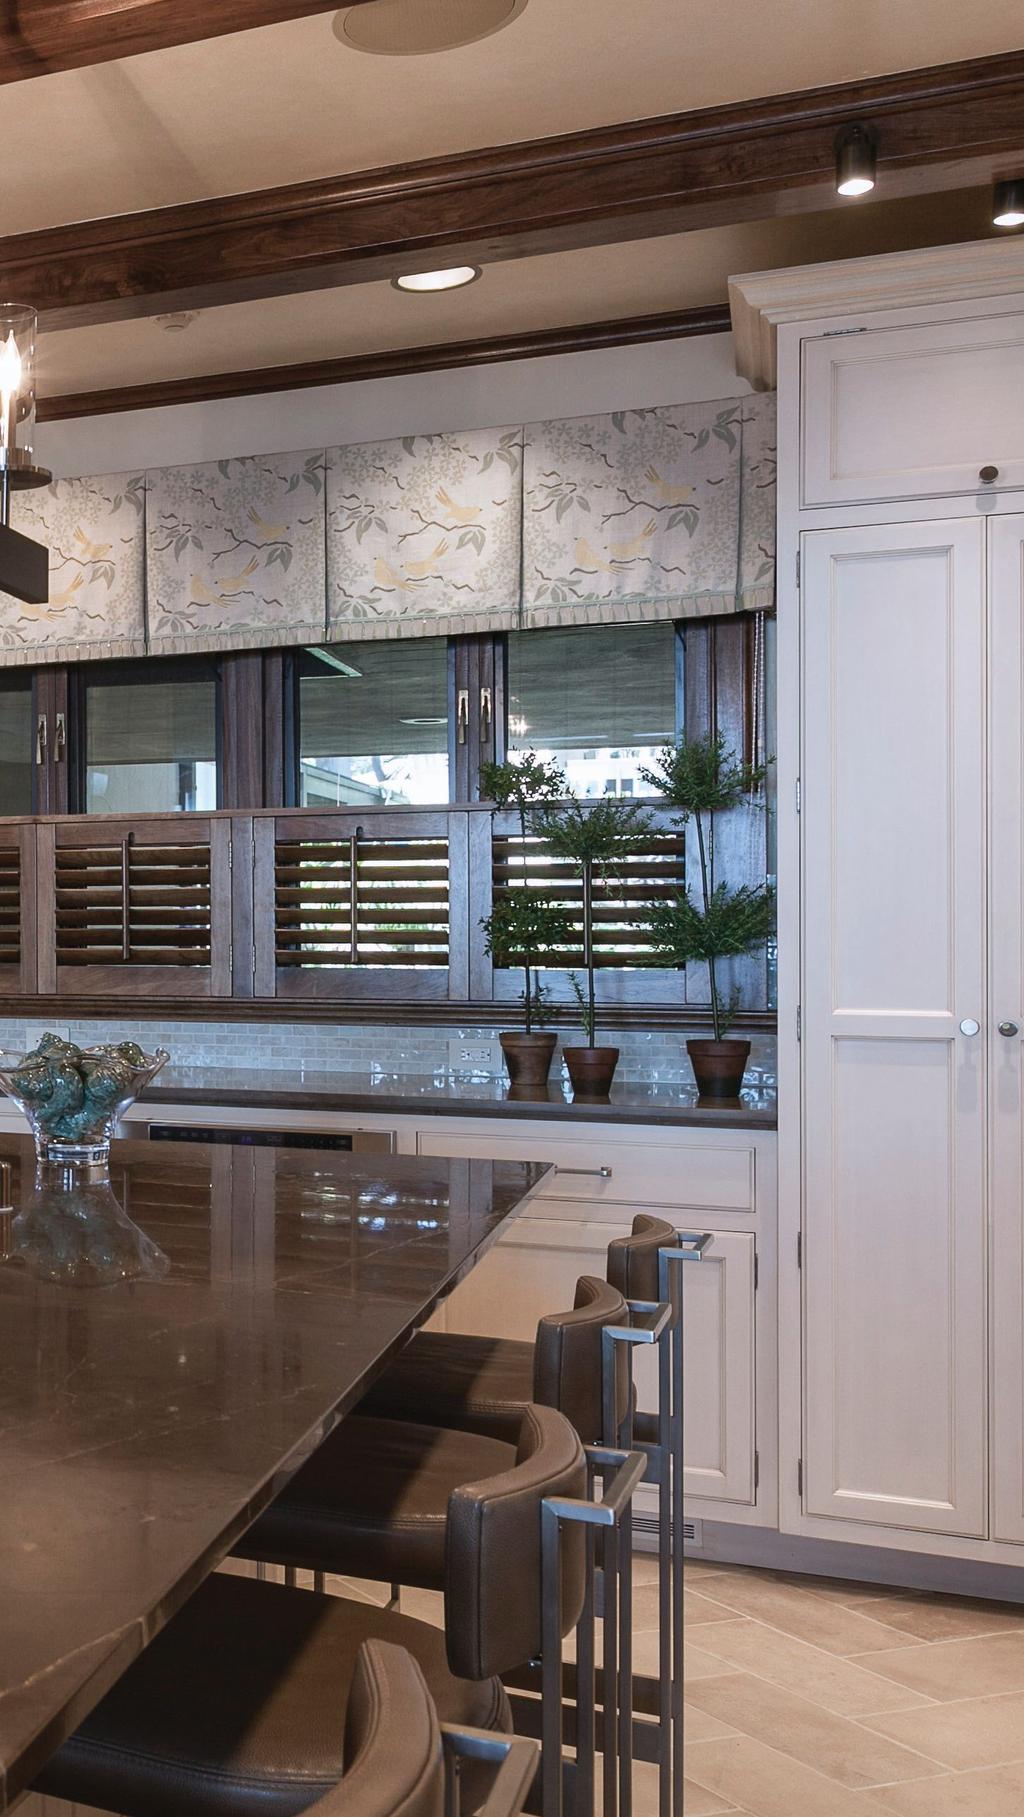 A thoughtful mix of textures and finishes make up the kitchen.